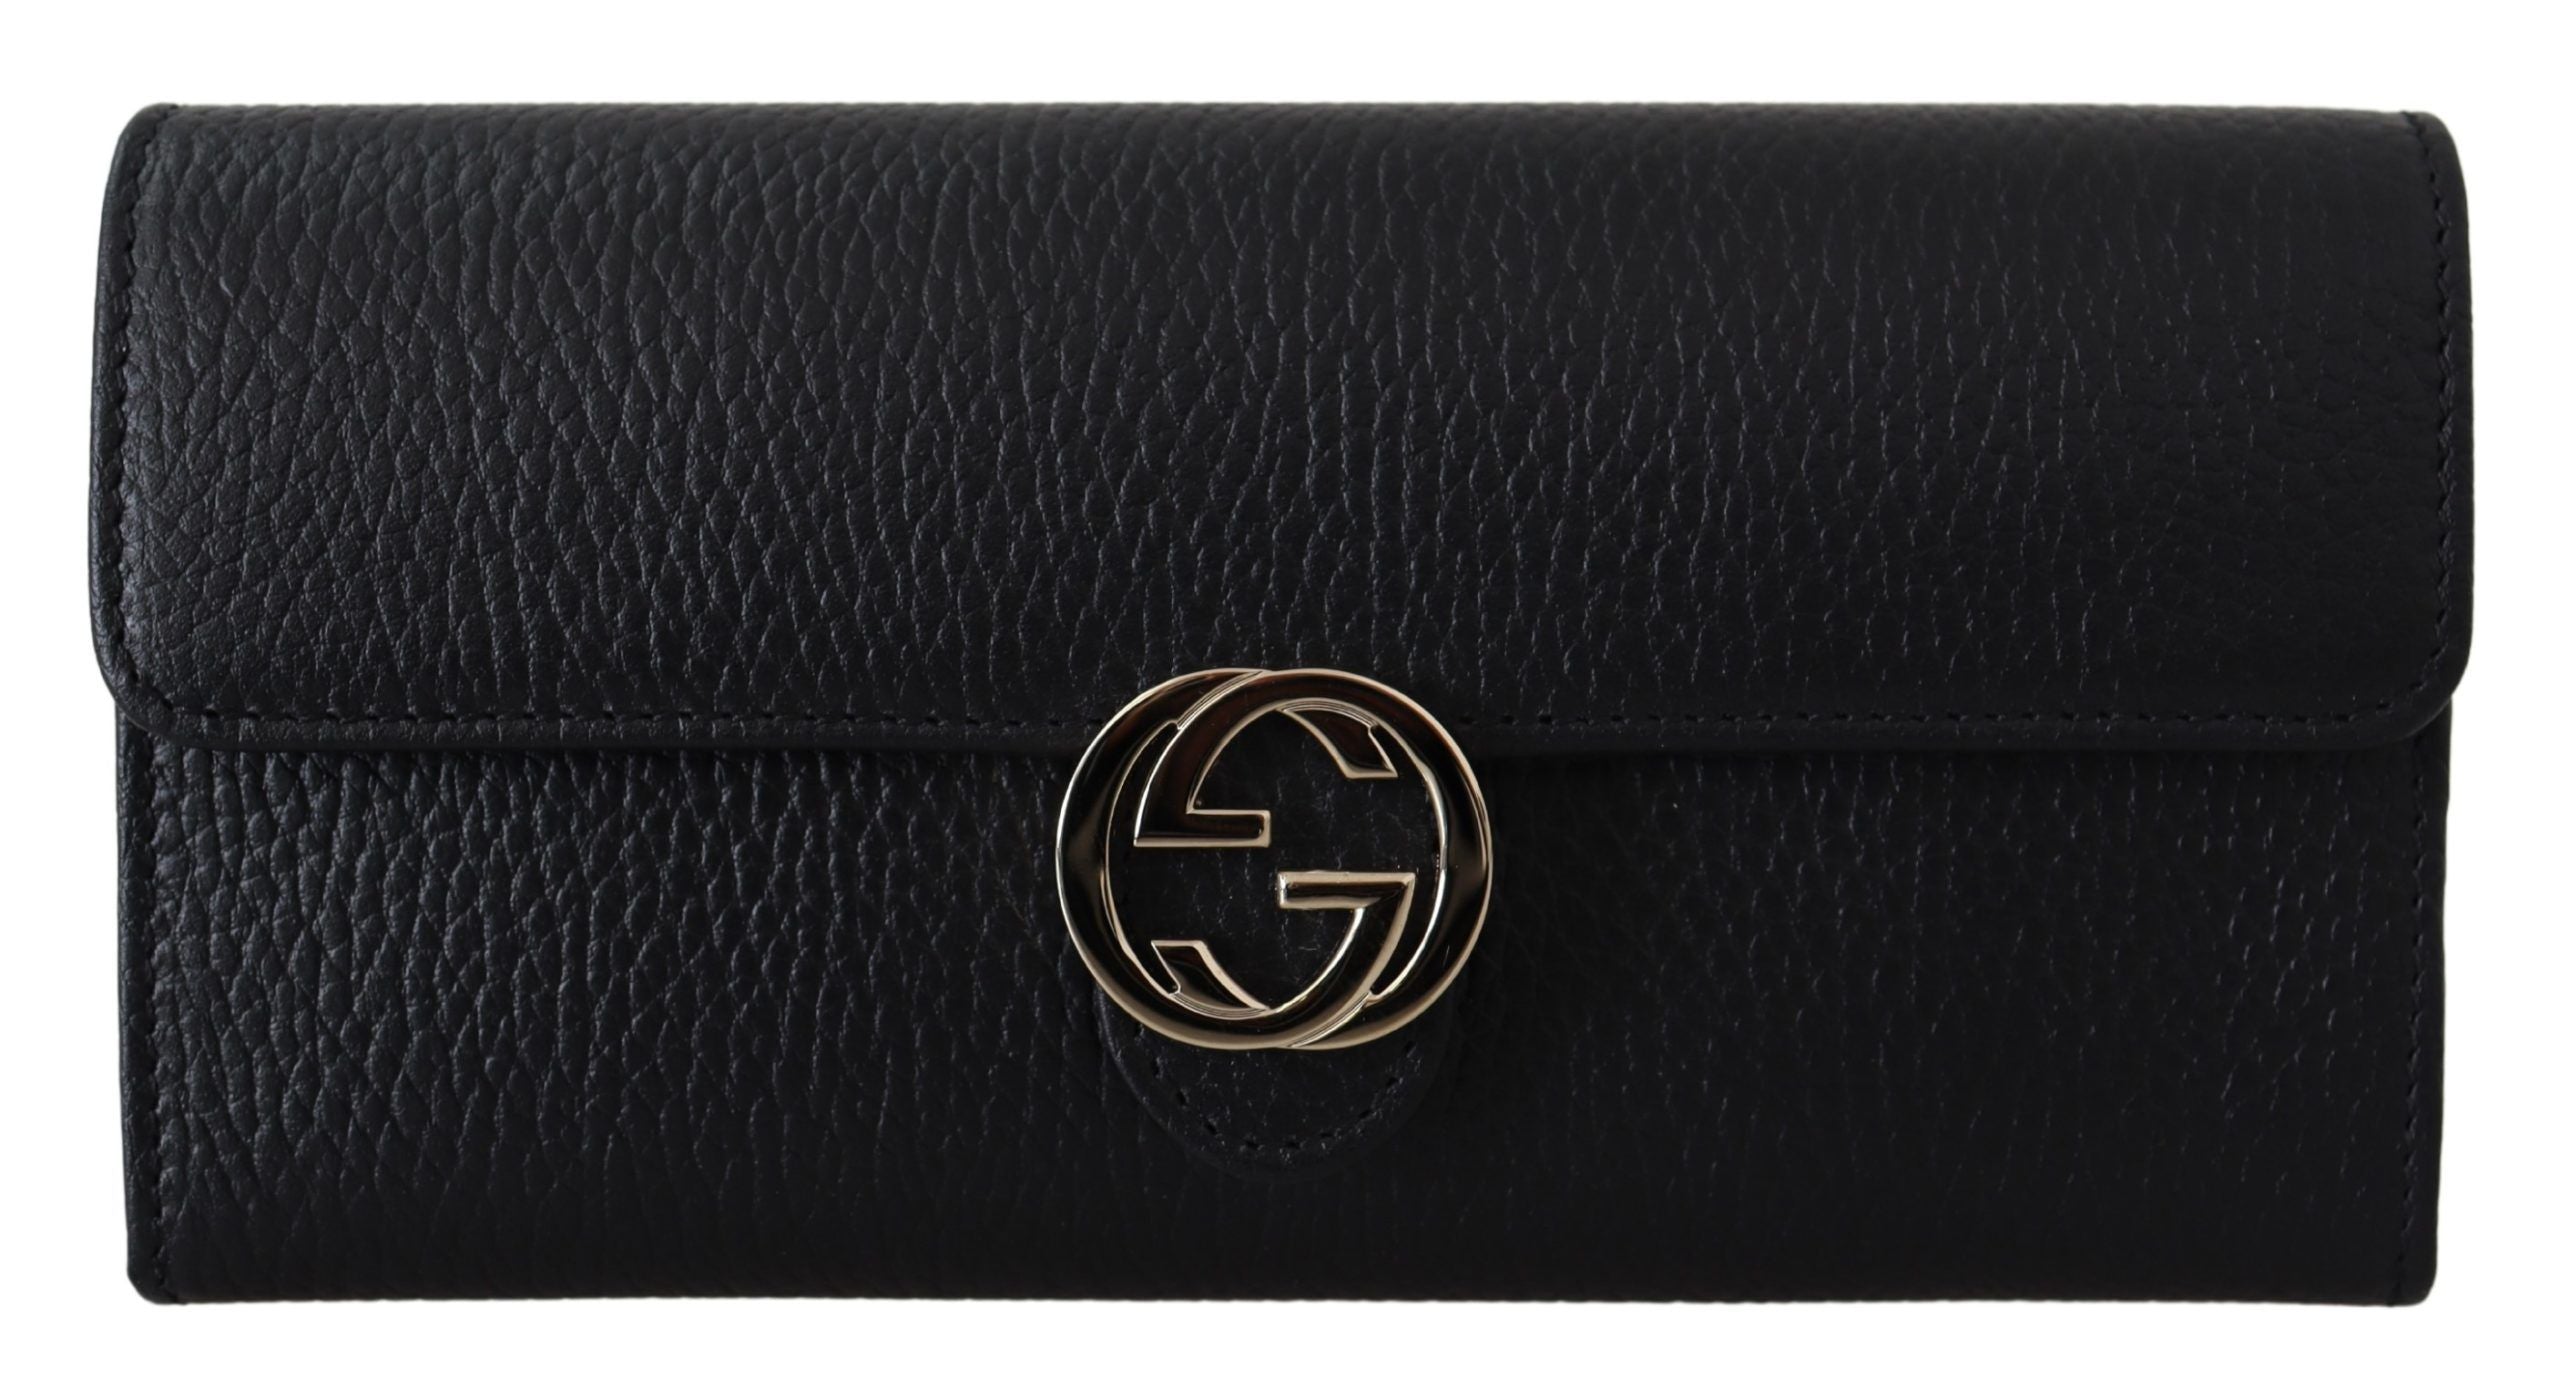 Elegant Black Leather Wallet with GG Snap Closure - Divitiae Glamour